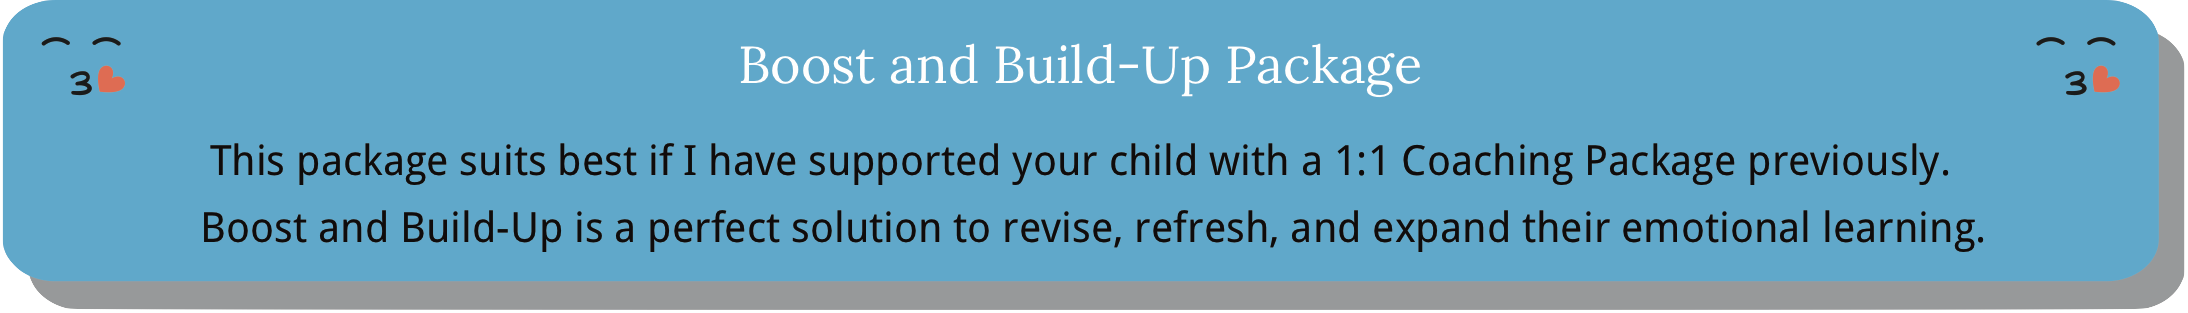 Boost and Build-up package for children.